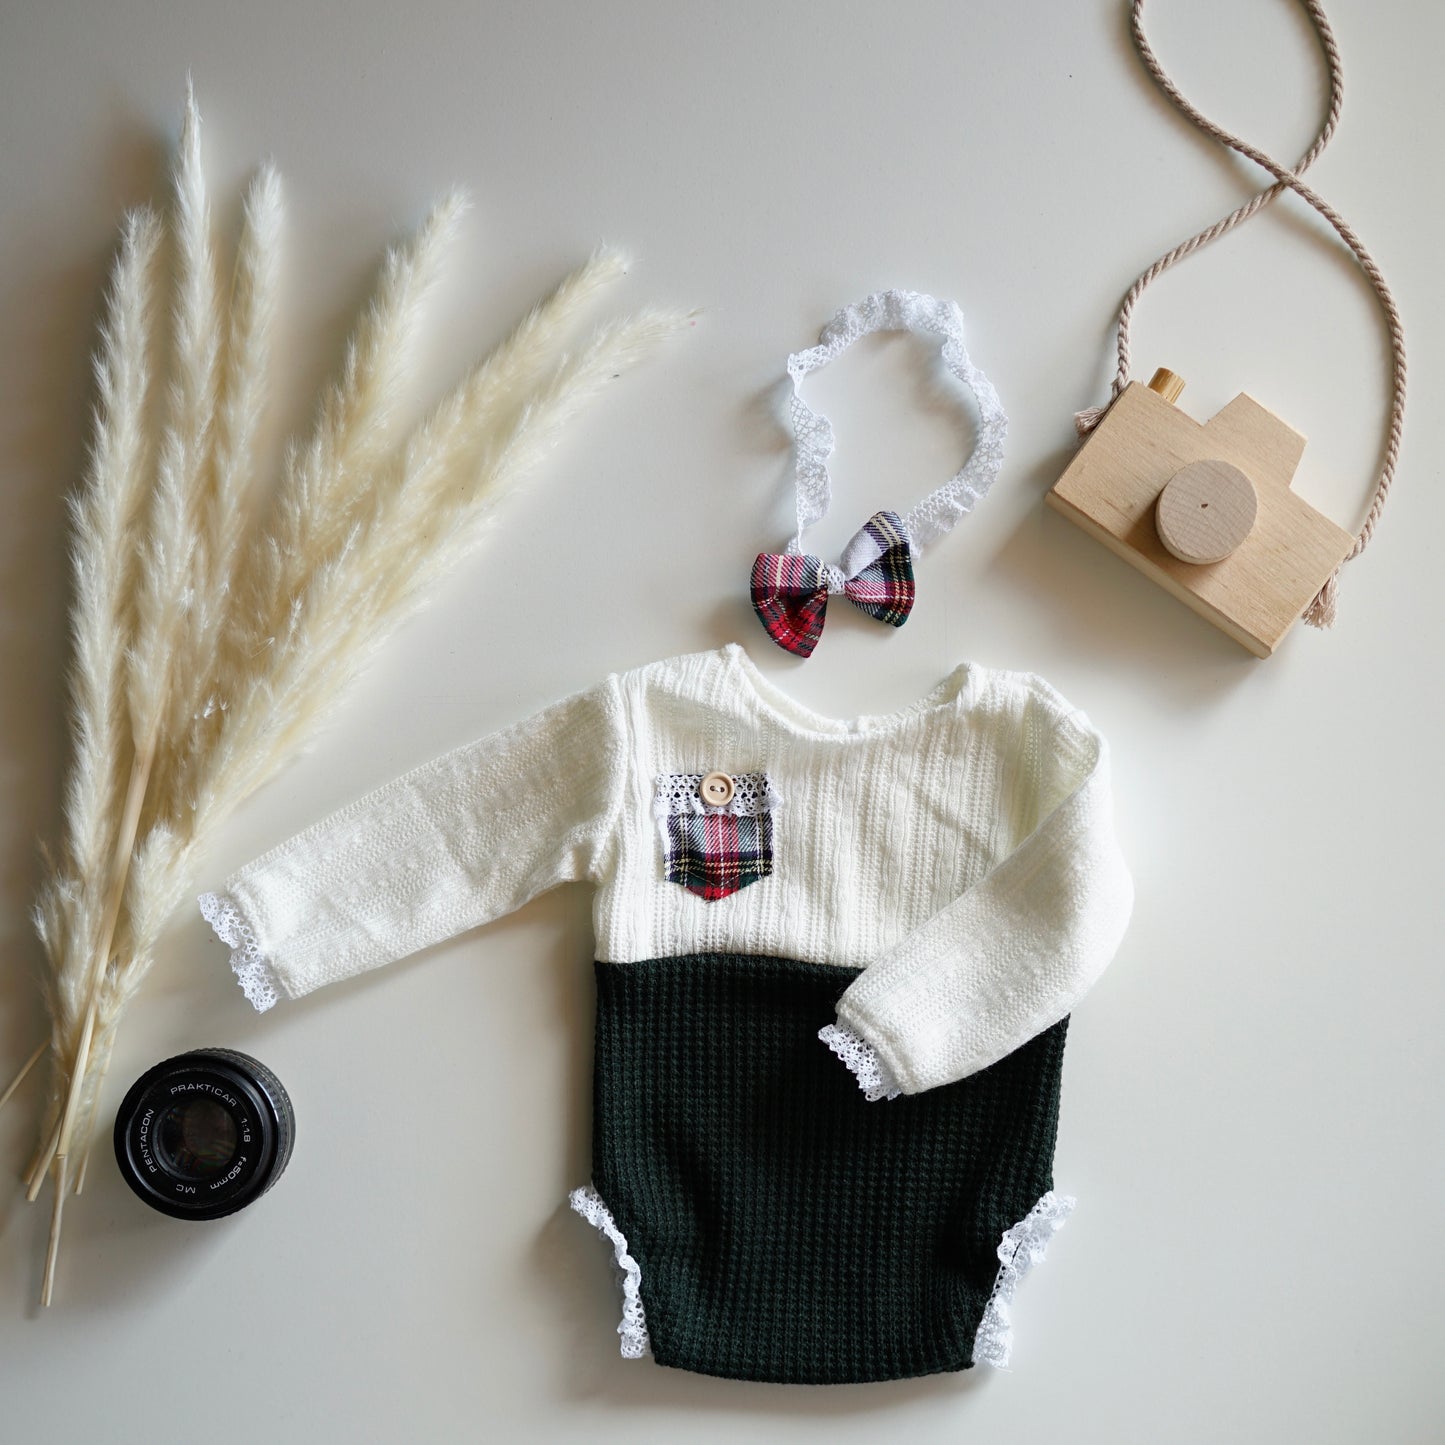 Anne Joy Newborn Photography Prop Outfit For Girl